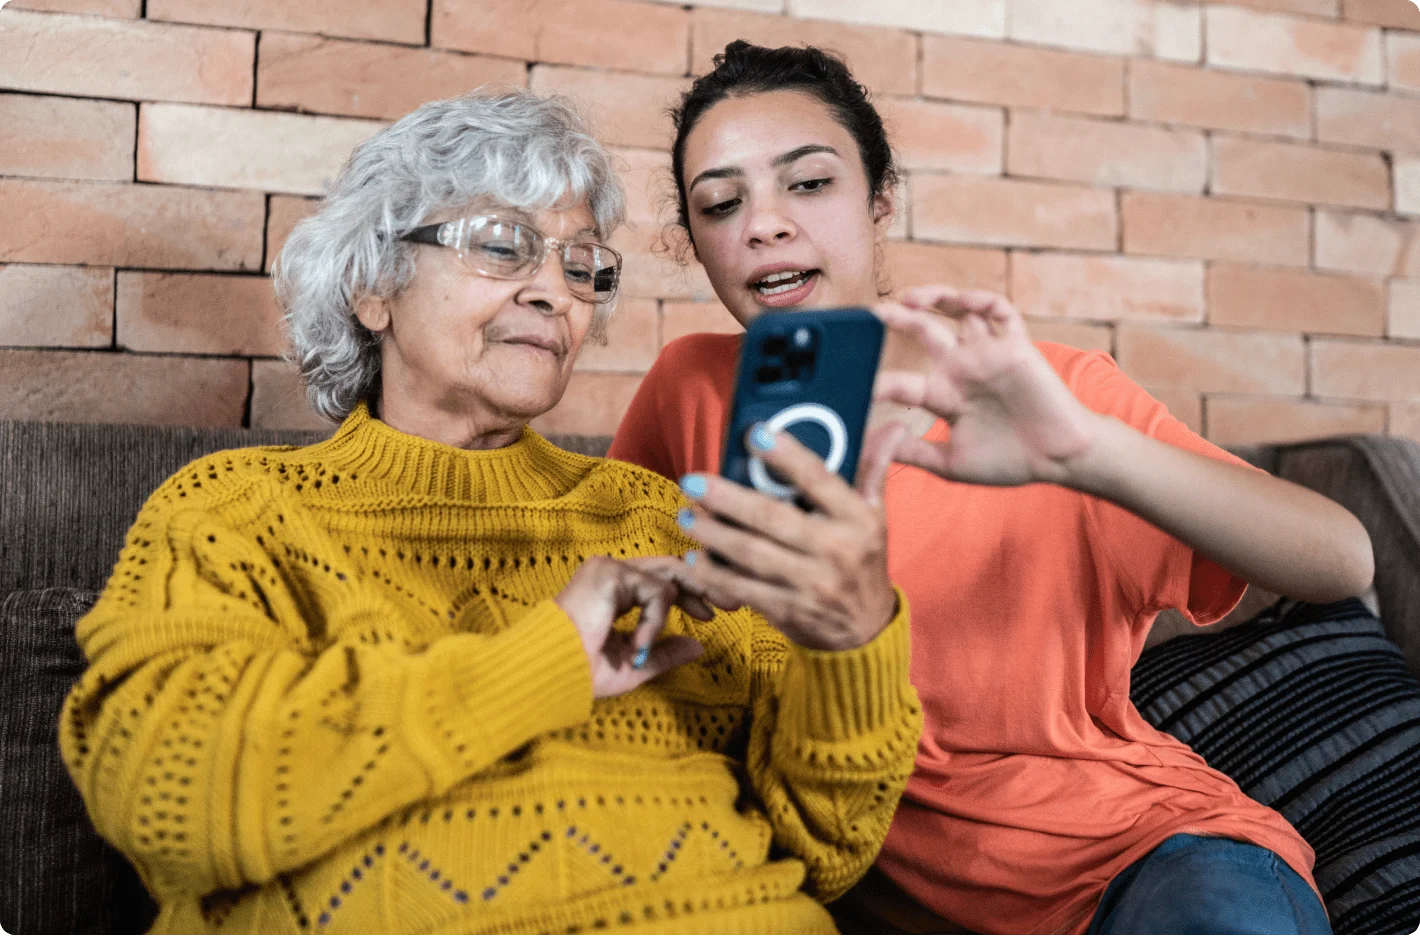 A young person and a senior sitting together and interacting with a smartphone.